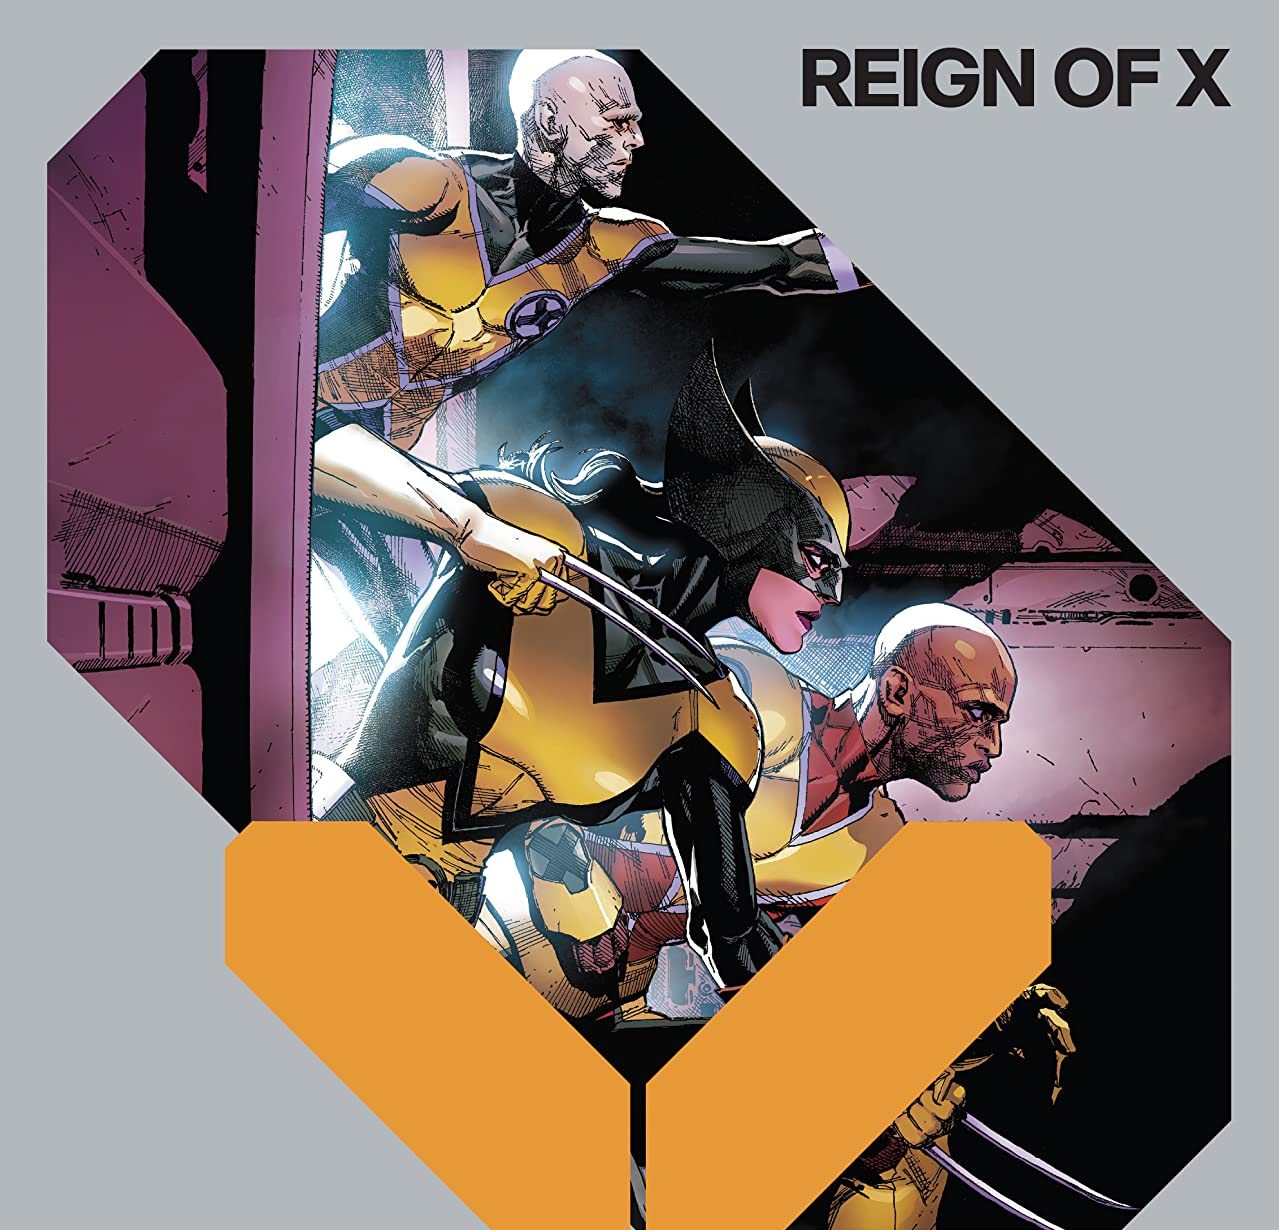 'Reign of X' Vol. 6 review